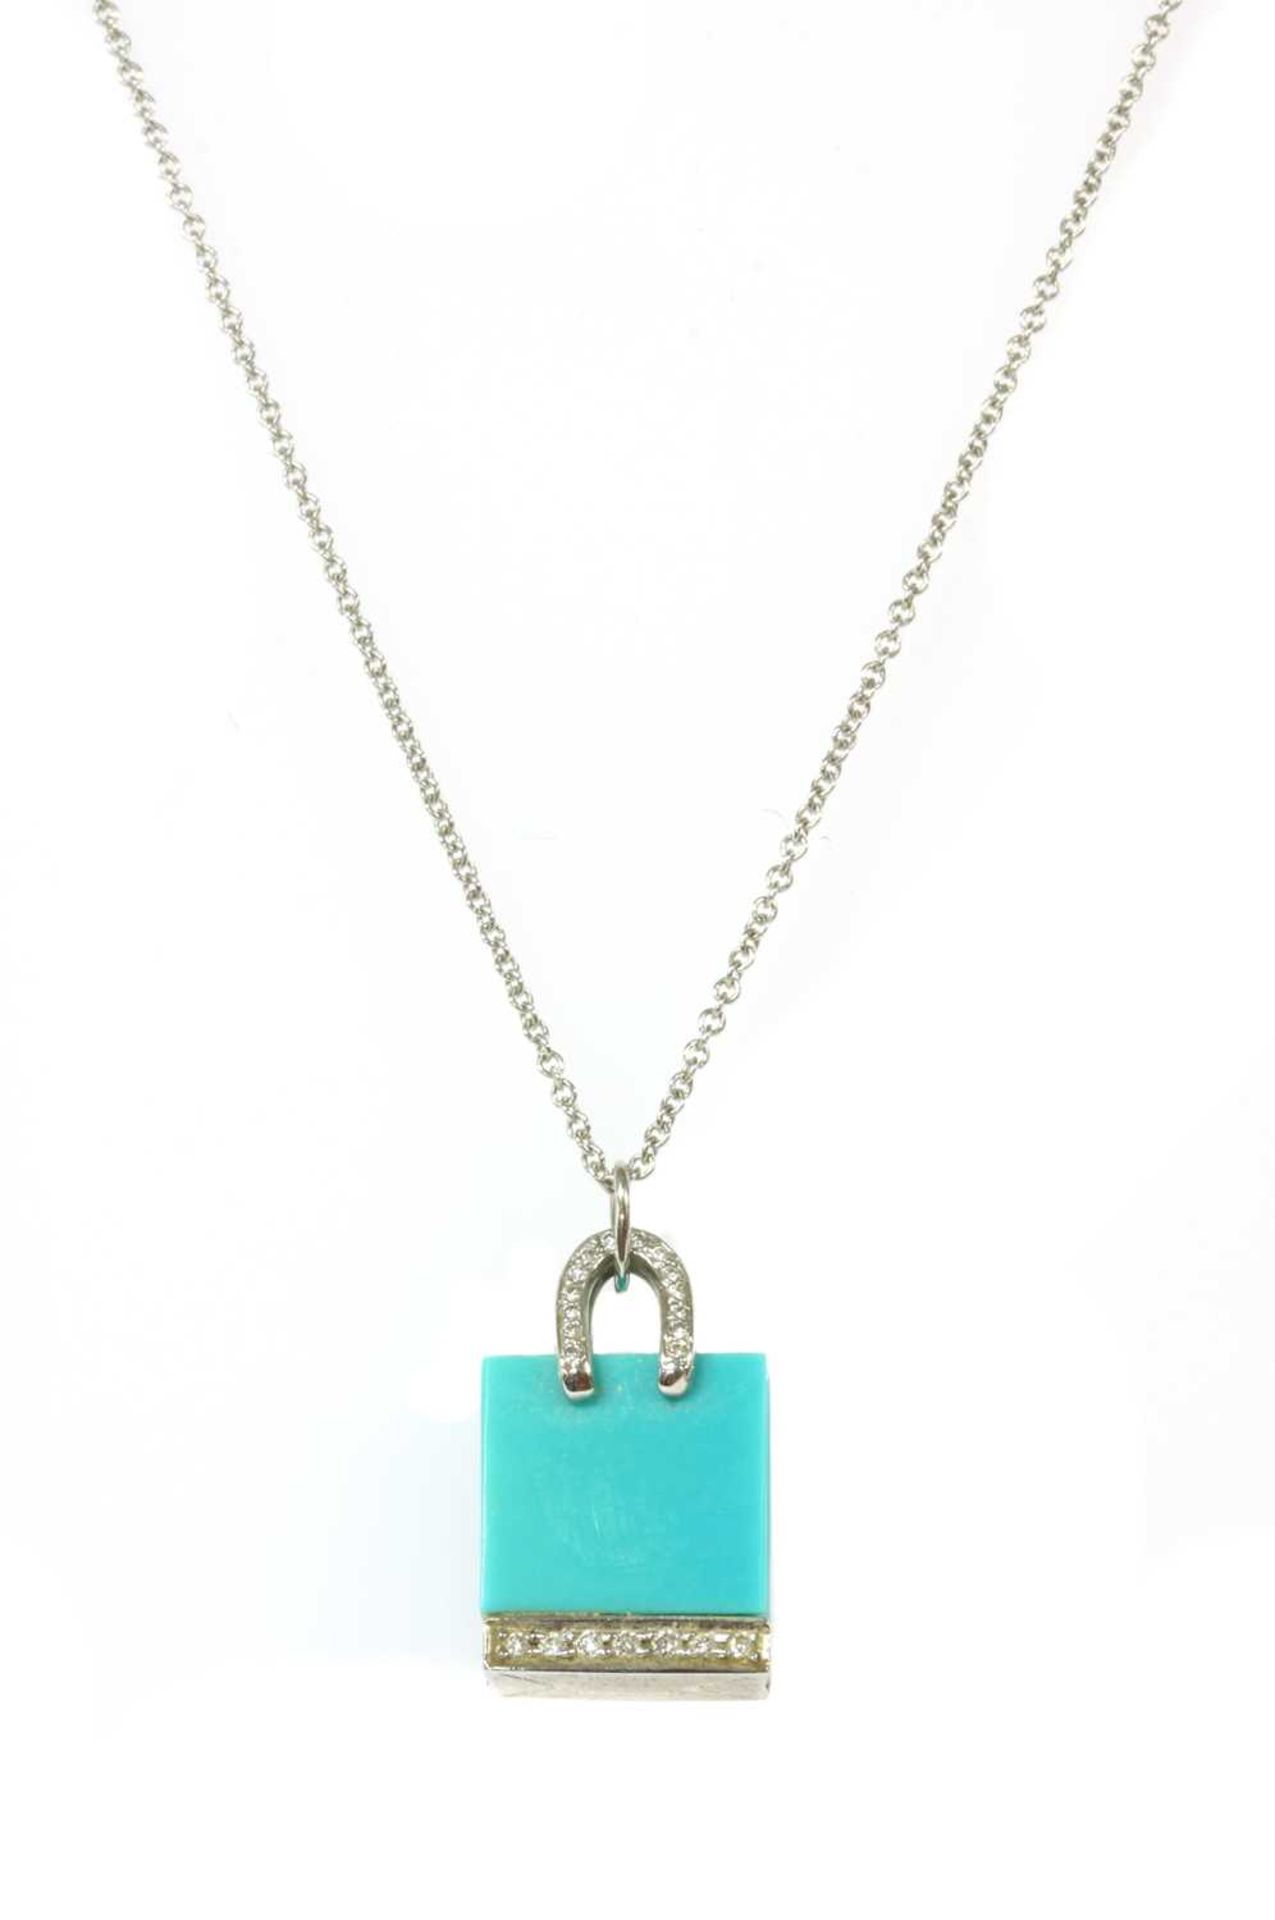 A platinum turquoise and diamond shopping bag pendant/charm by Tiffany & Co.,